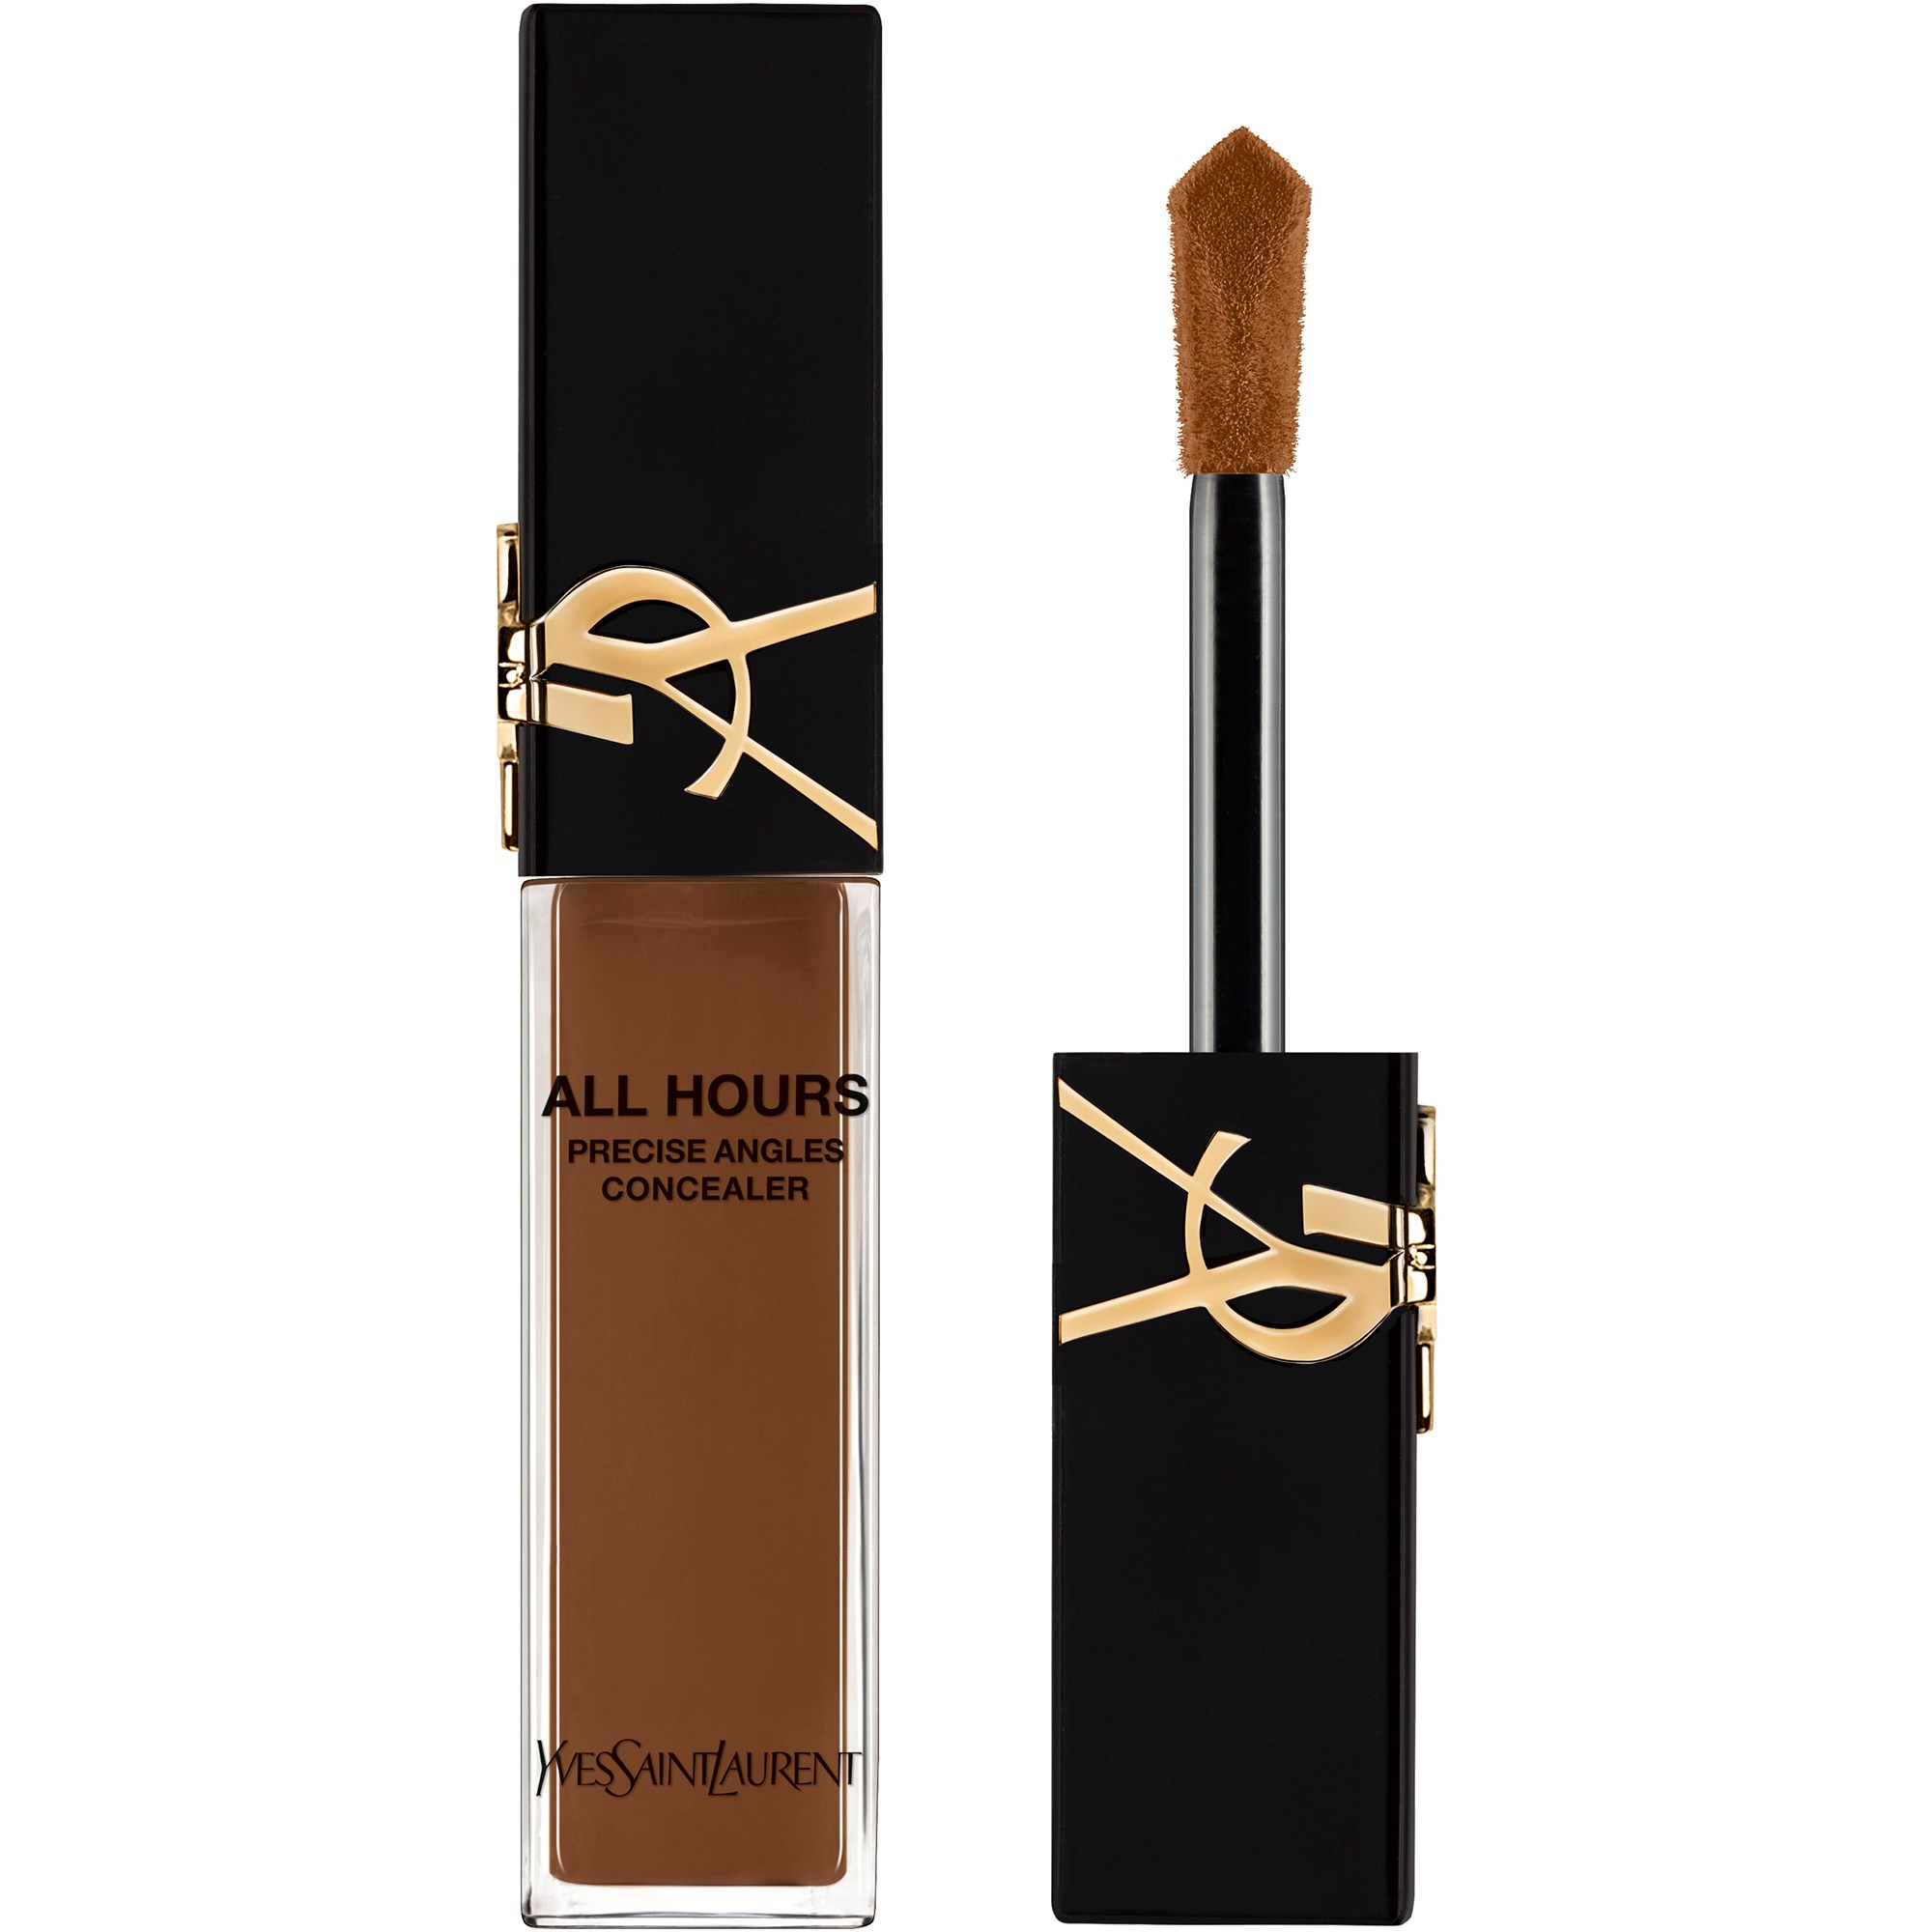 Yves Saint Laurent All Hours Precise Angles Concealer DW7